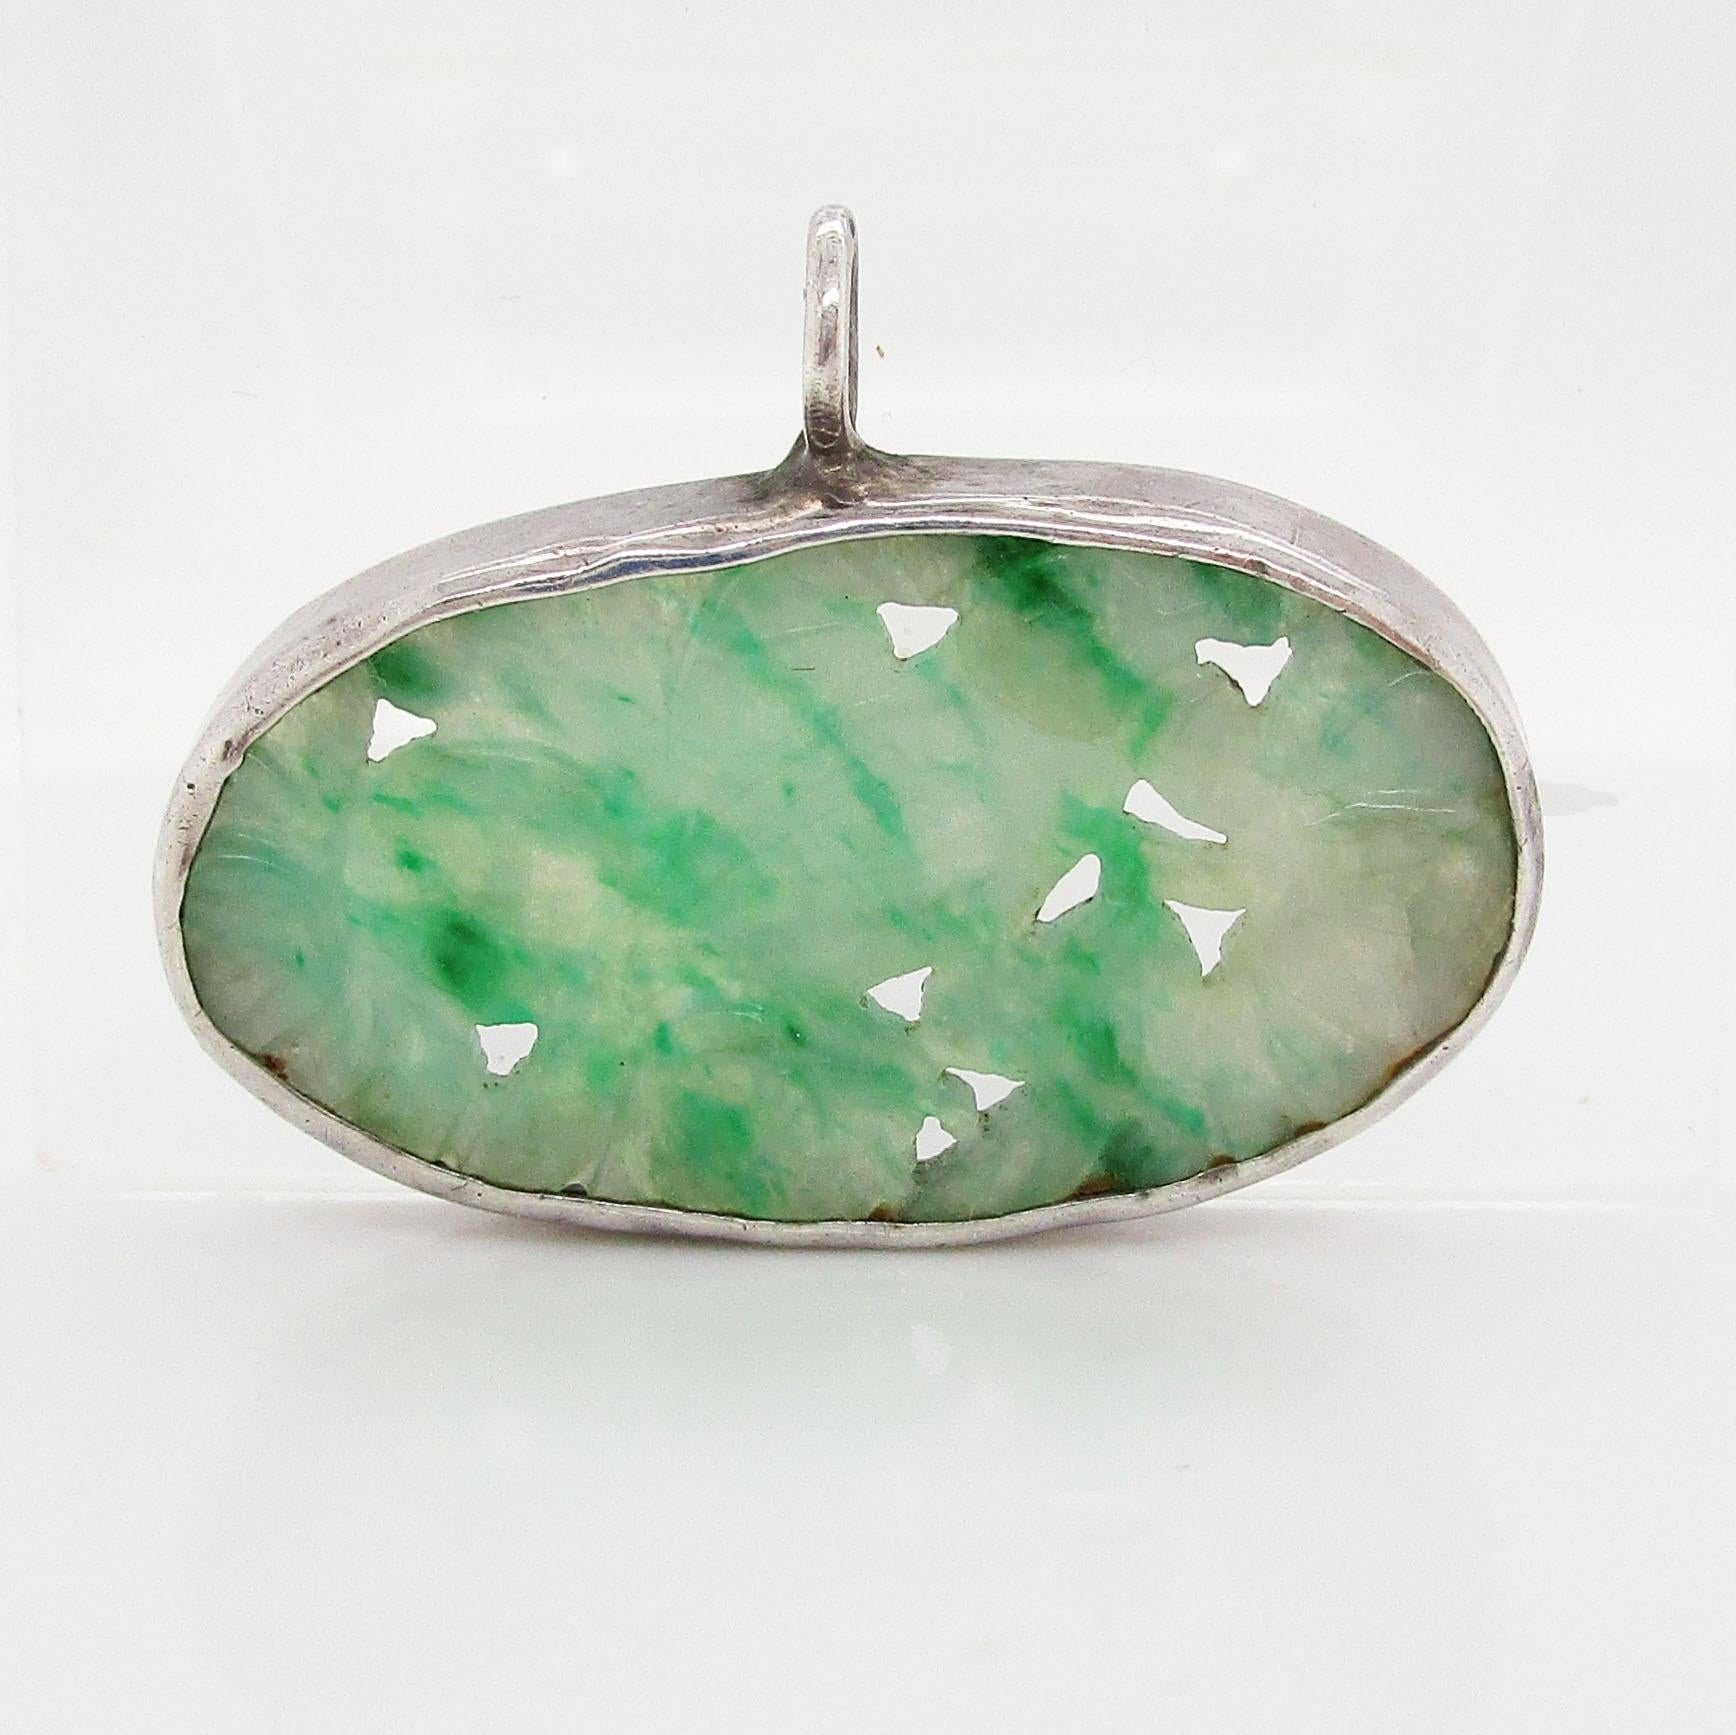 This is an absolutely beautiful piece of carved jade bezel set into an Art Deco sterling silver pendant. The jade is Chinese export and a truly exquisite green color! The jade is hand carved and pierced with a lovely floral bird motif. This piece of